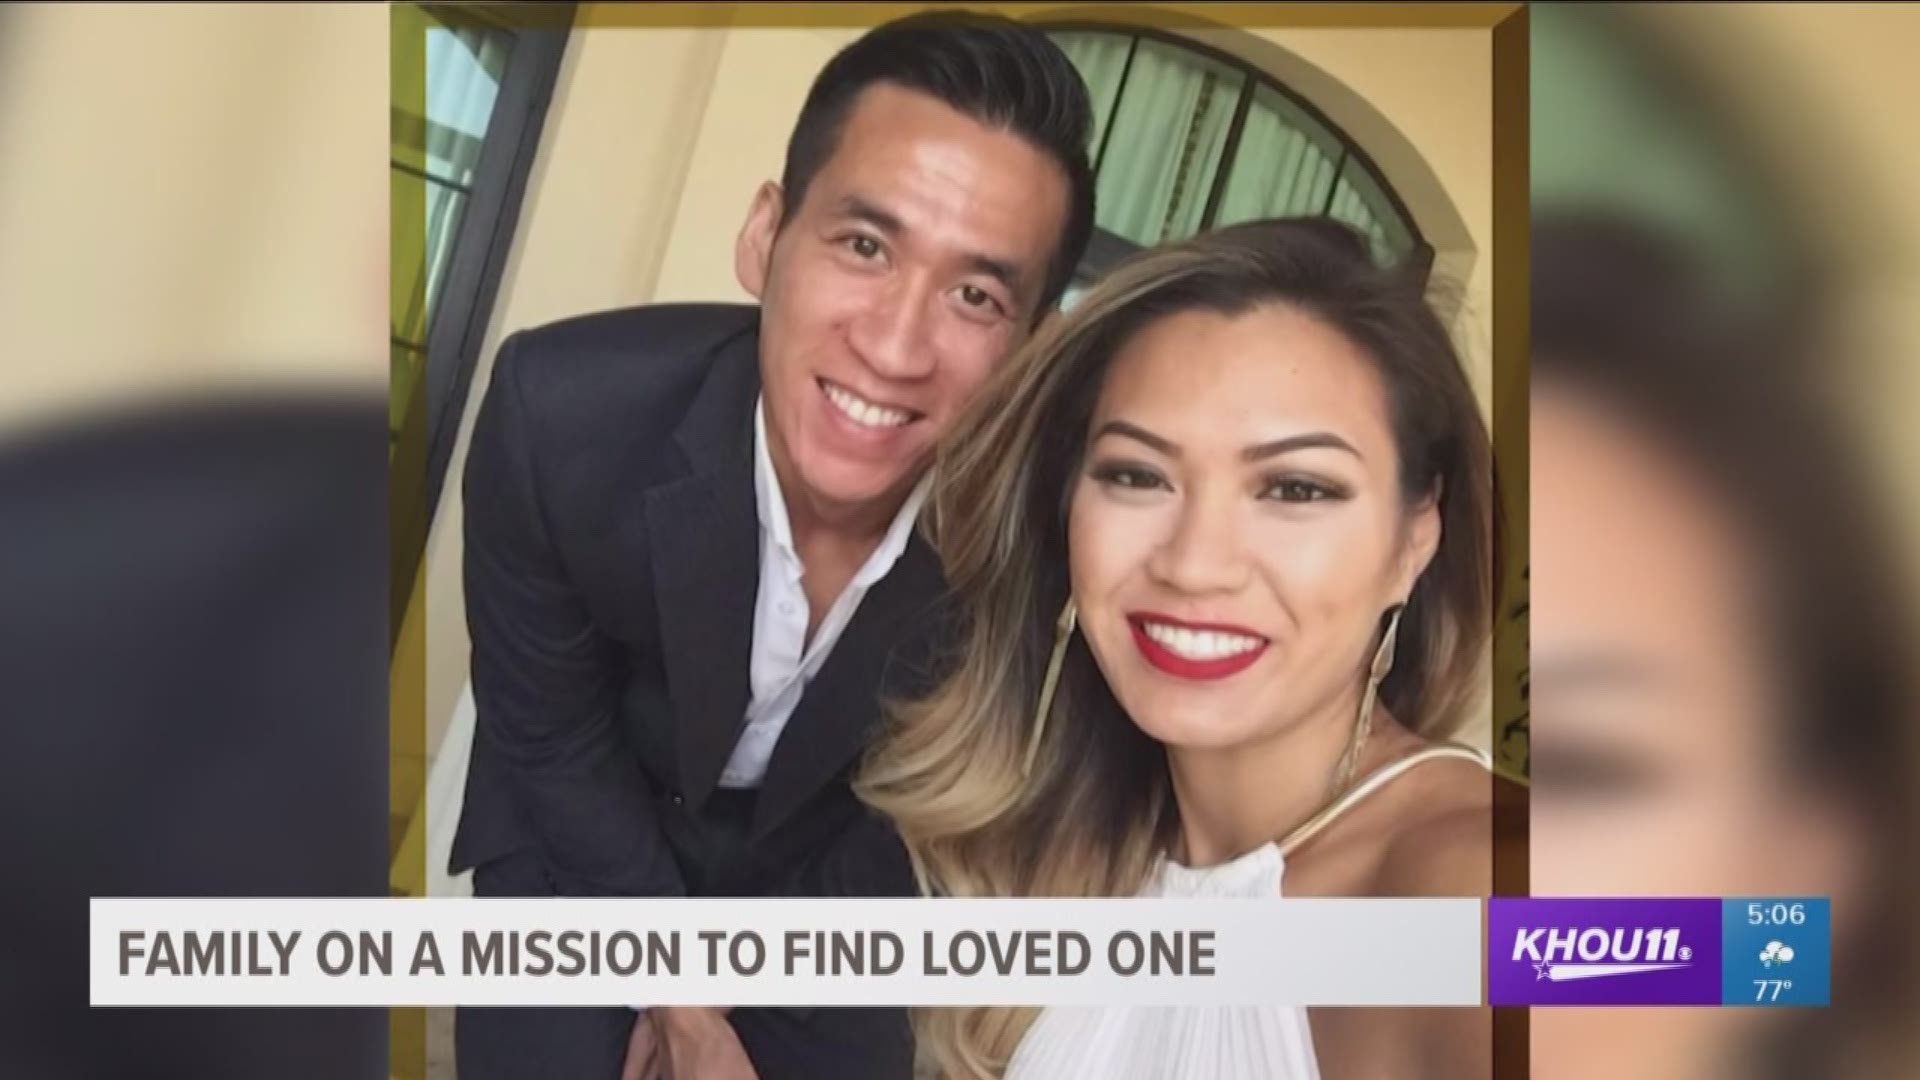 A Houston family is on a mission to find 32-year-old Will Nguyen, who was arrested Sunday in Vietnam during violent protests.